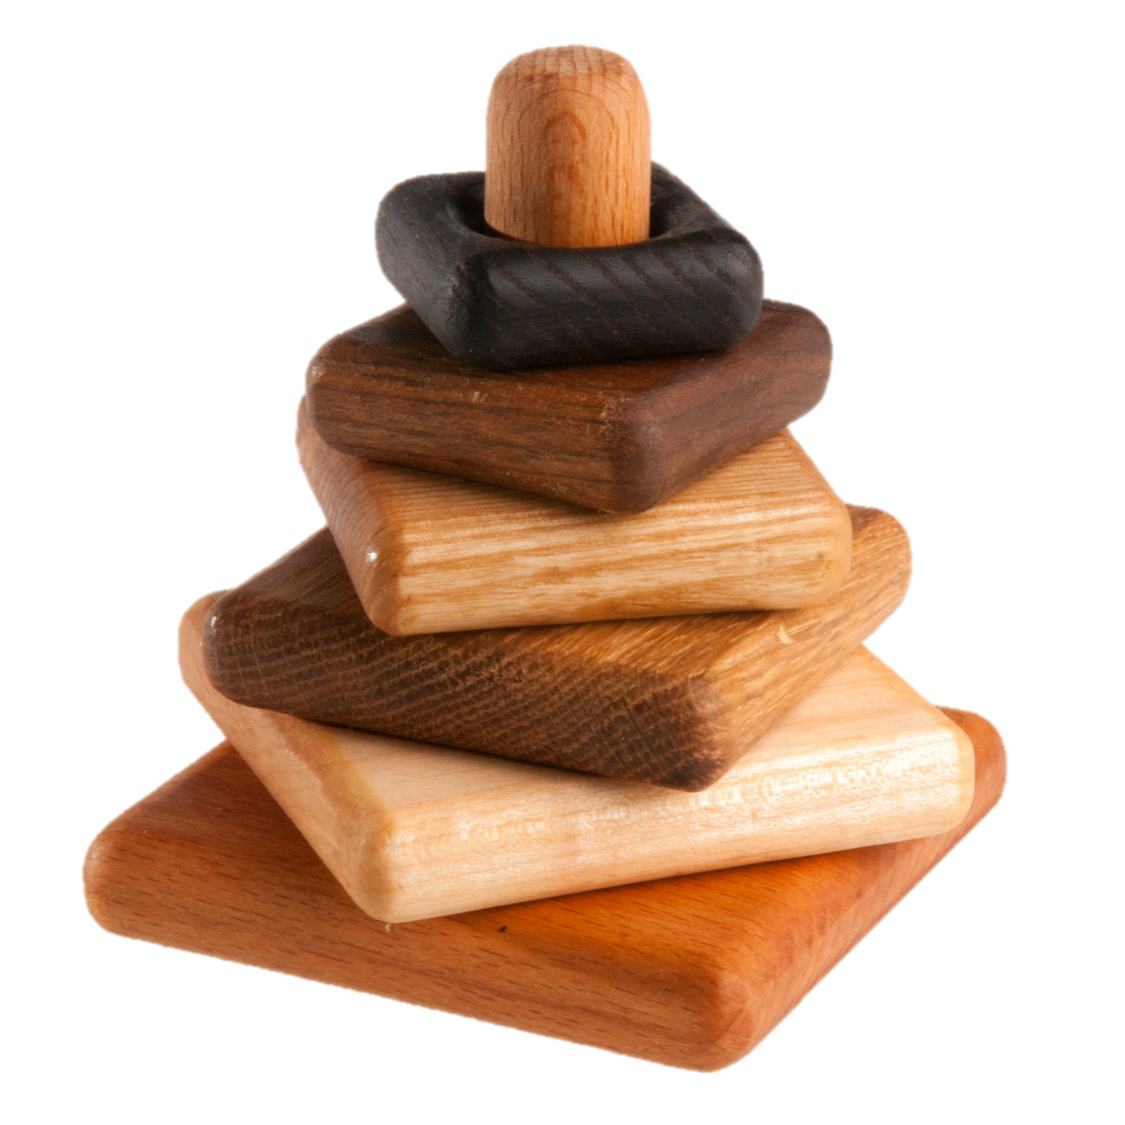 Wooden stacking toy in square shape from 6 types of wood